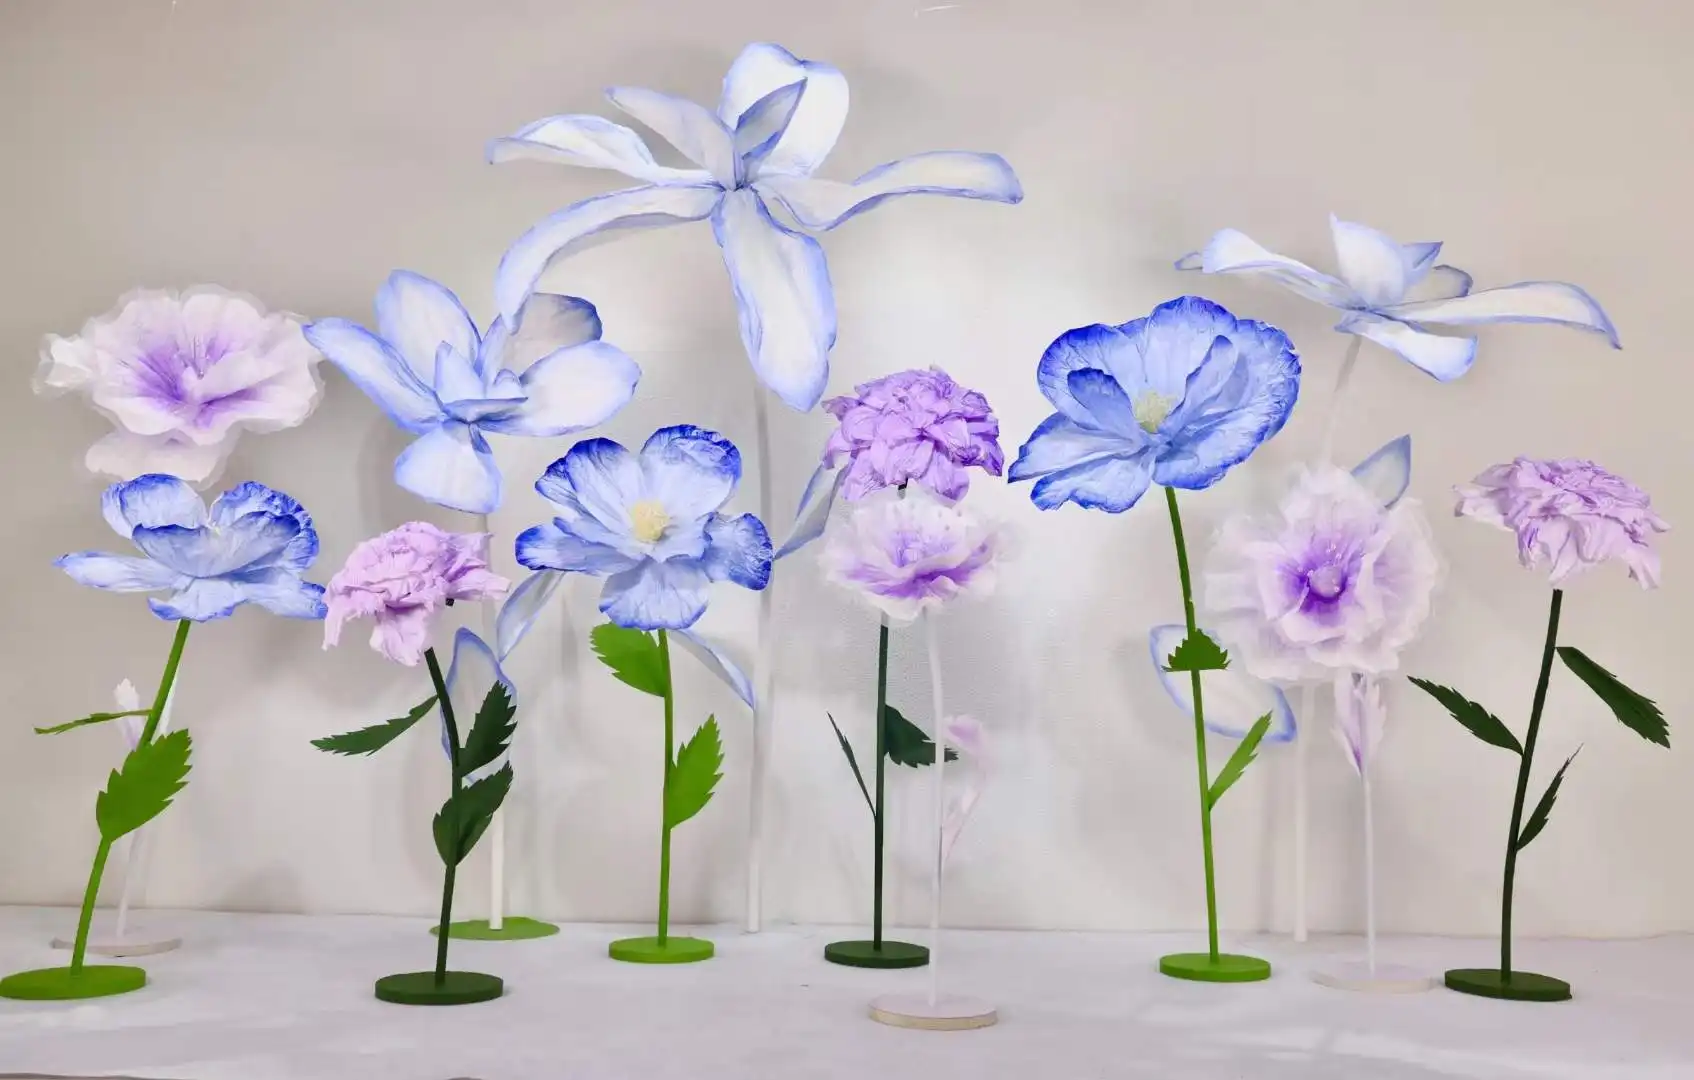 R47 New Design Giant Flowers Wholesale Flower Giant Decorated Giant Artificial Flowers